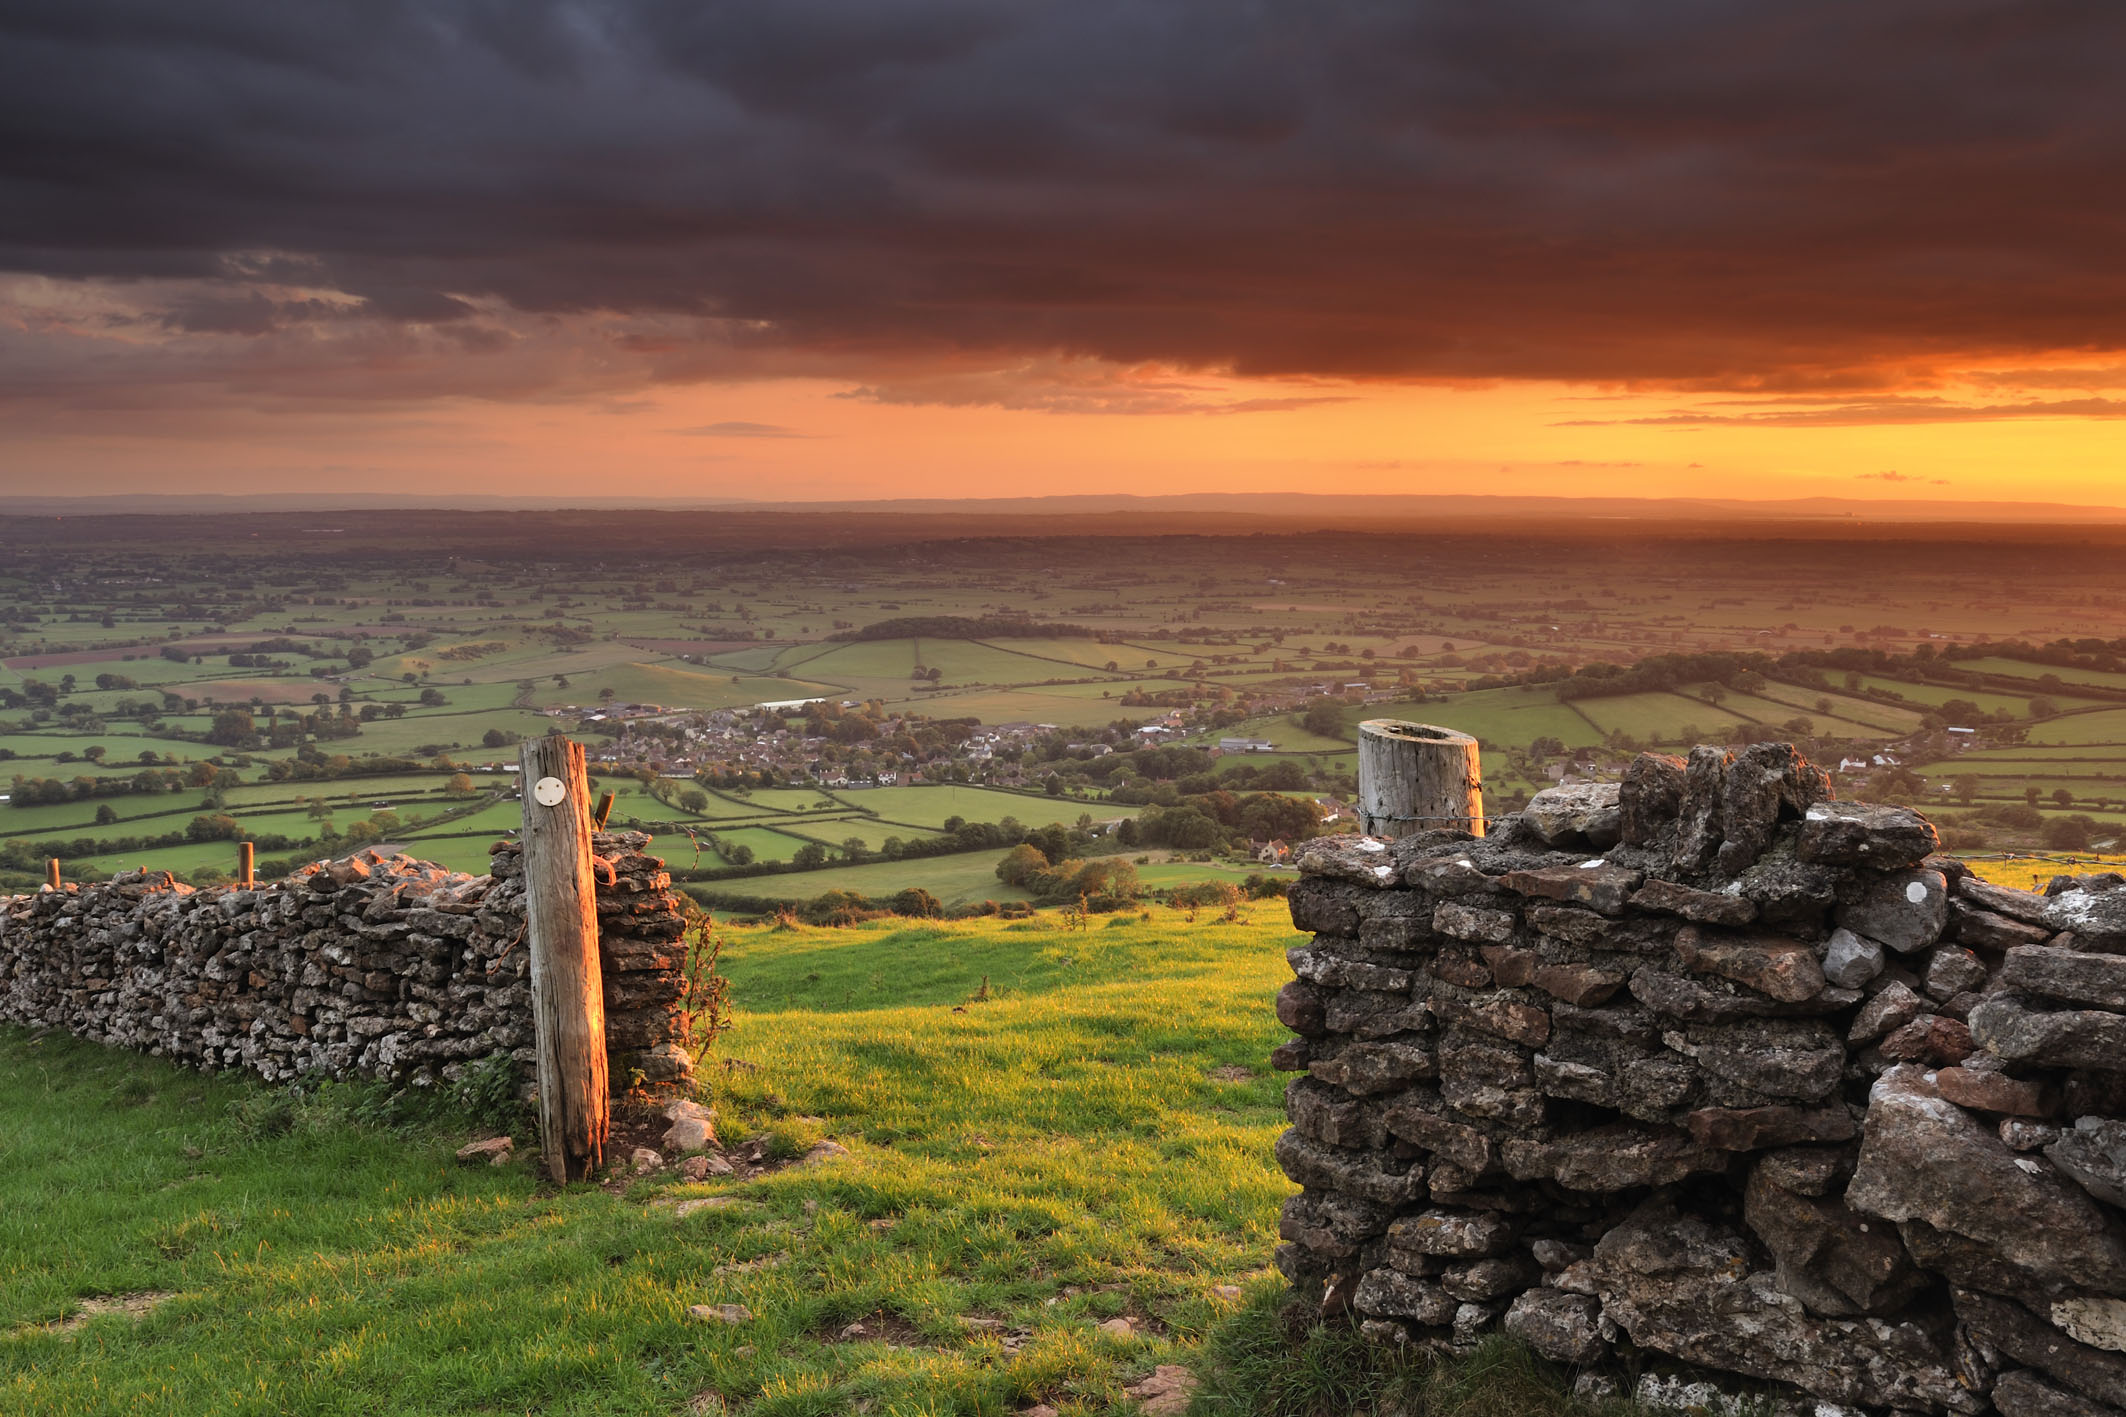 A fiery sunset breaks underneath storm clouds at Cook's Fields on the Mendip hills, Somerset.